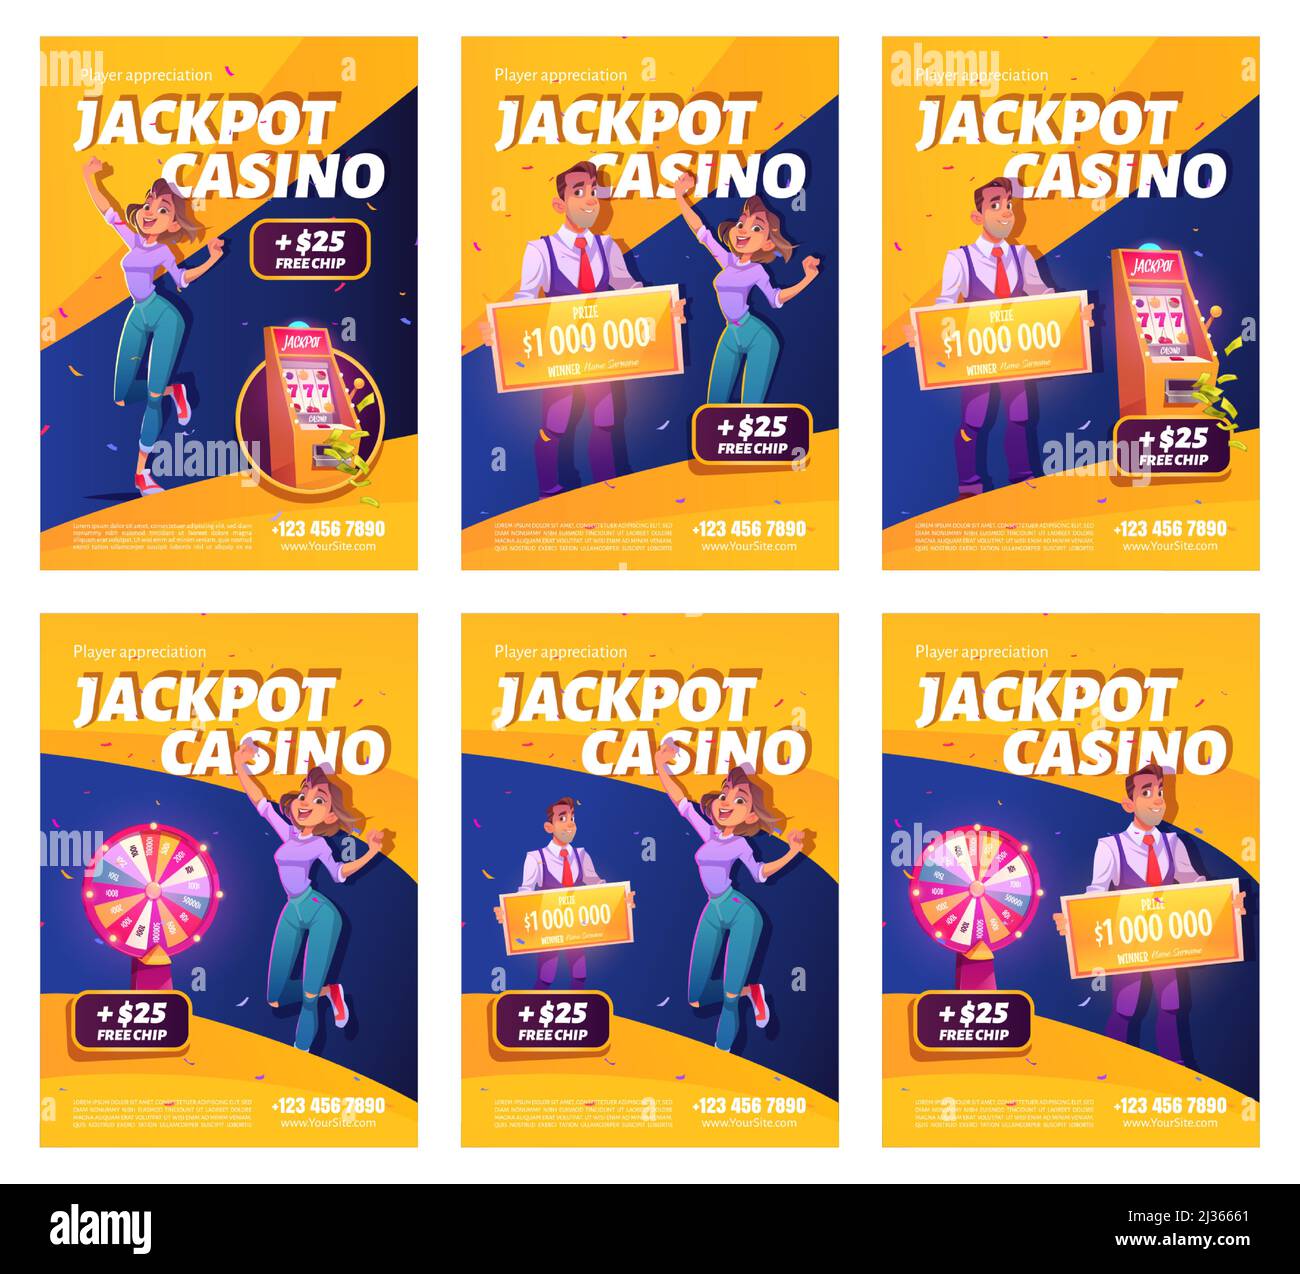 Jackpot casino win ad posters. Lucky woman celebrate winning prize jumping at money and confetti falling at lucky wheel and on one-armed bandit slot m Stock Vector